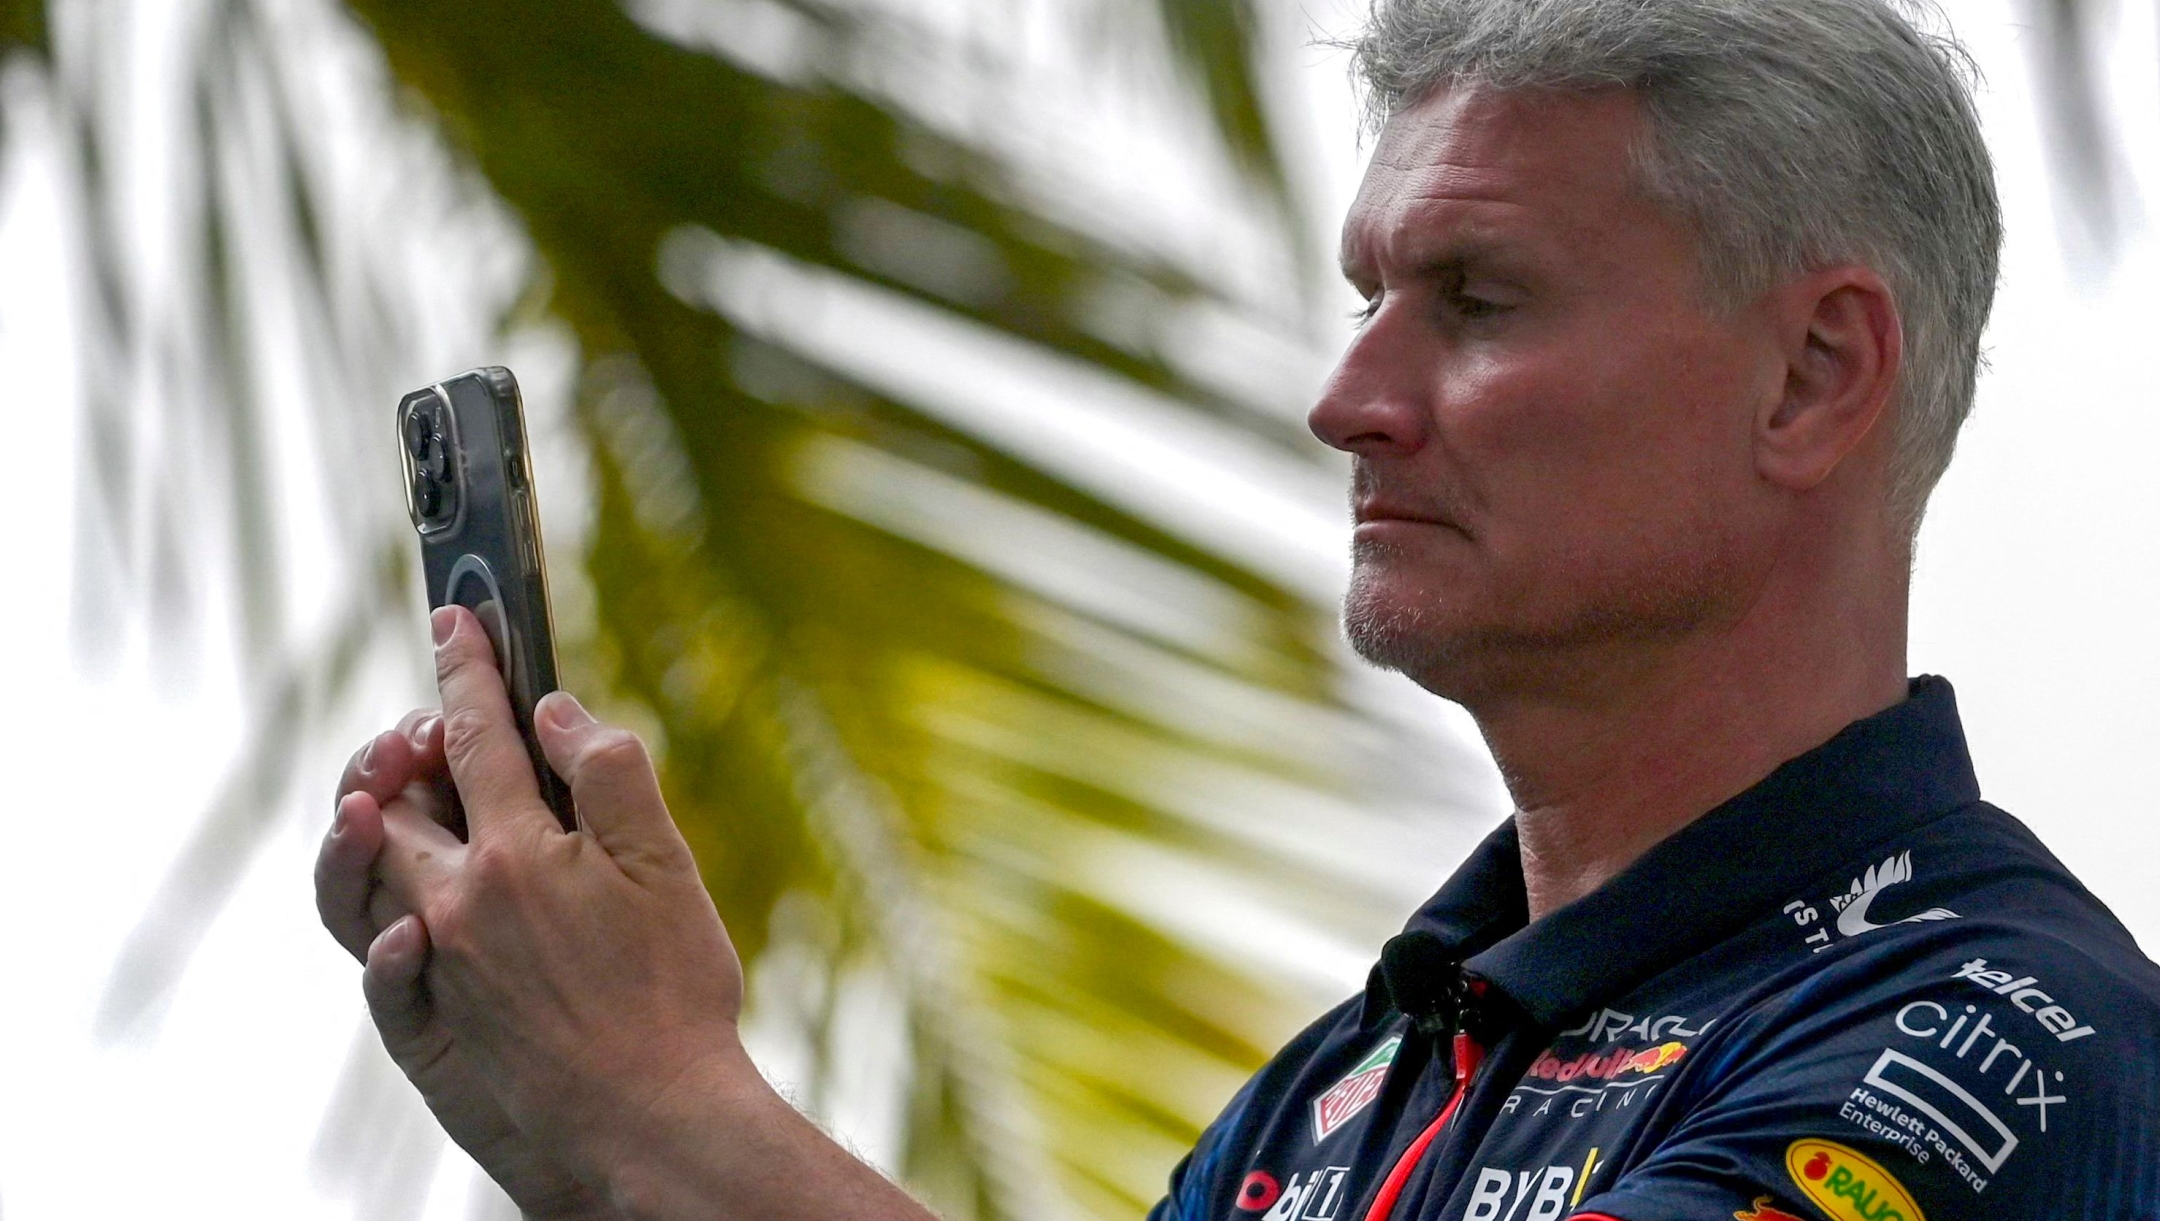 Britain's former Formula One driver David Coulthard takes pictures with his phone during a press conference in Mumbai on March 11, 2023. (Photo by Indranil MUKHERJEE / AFP)